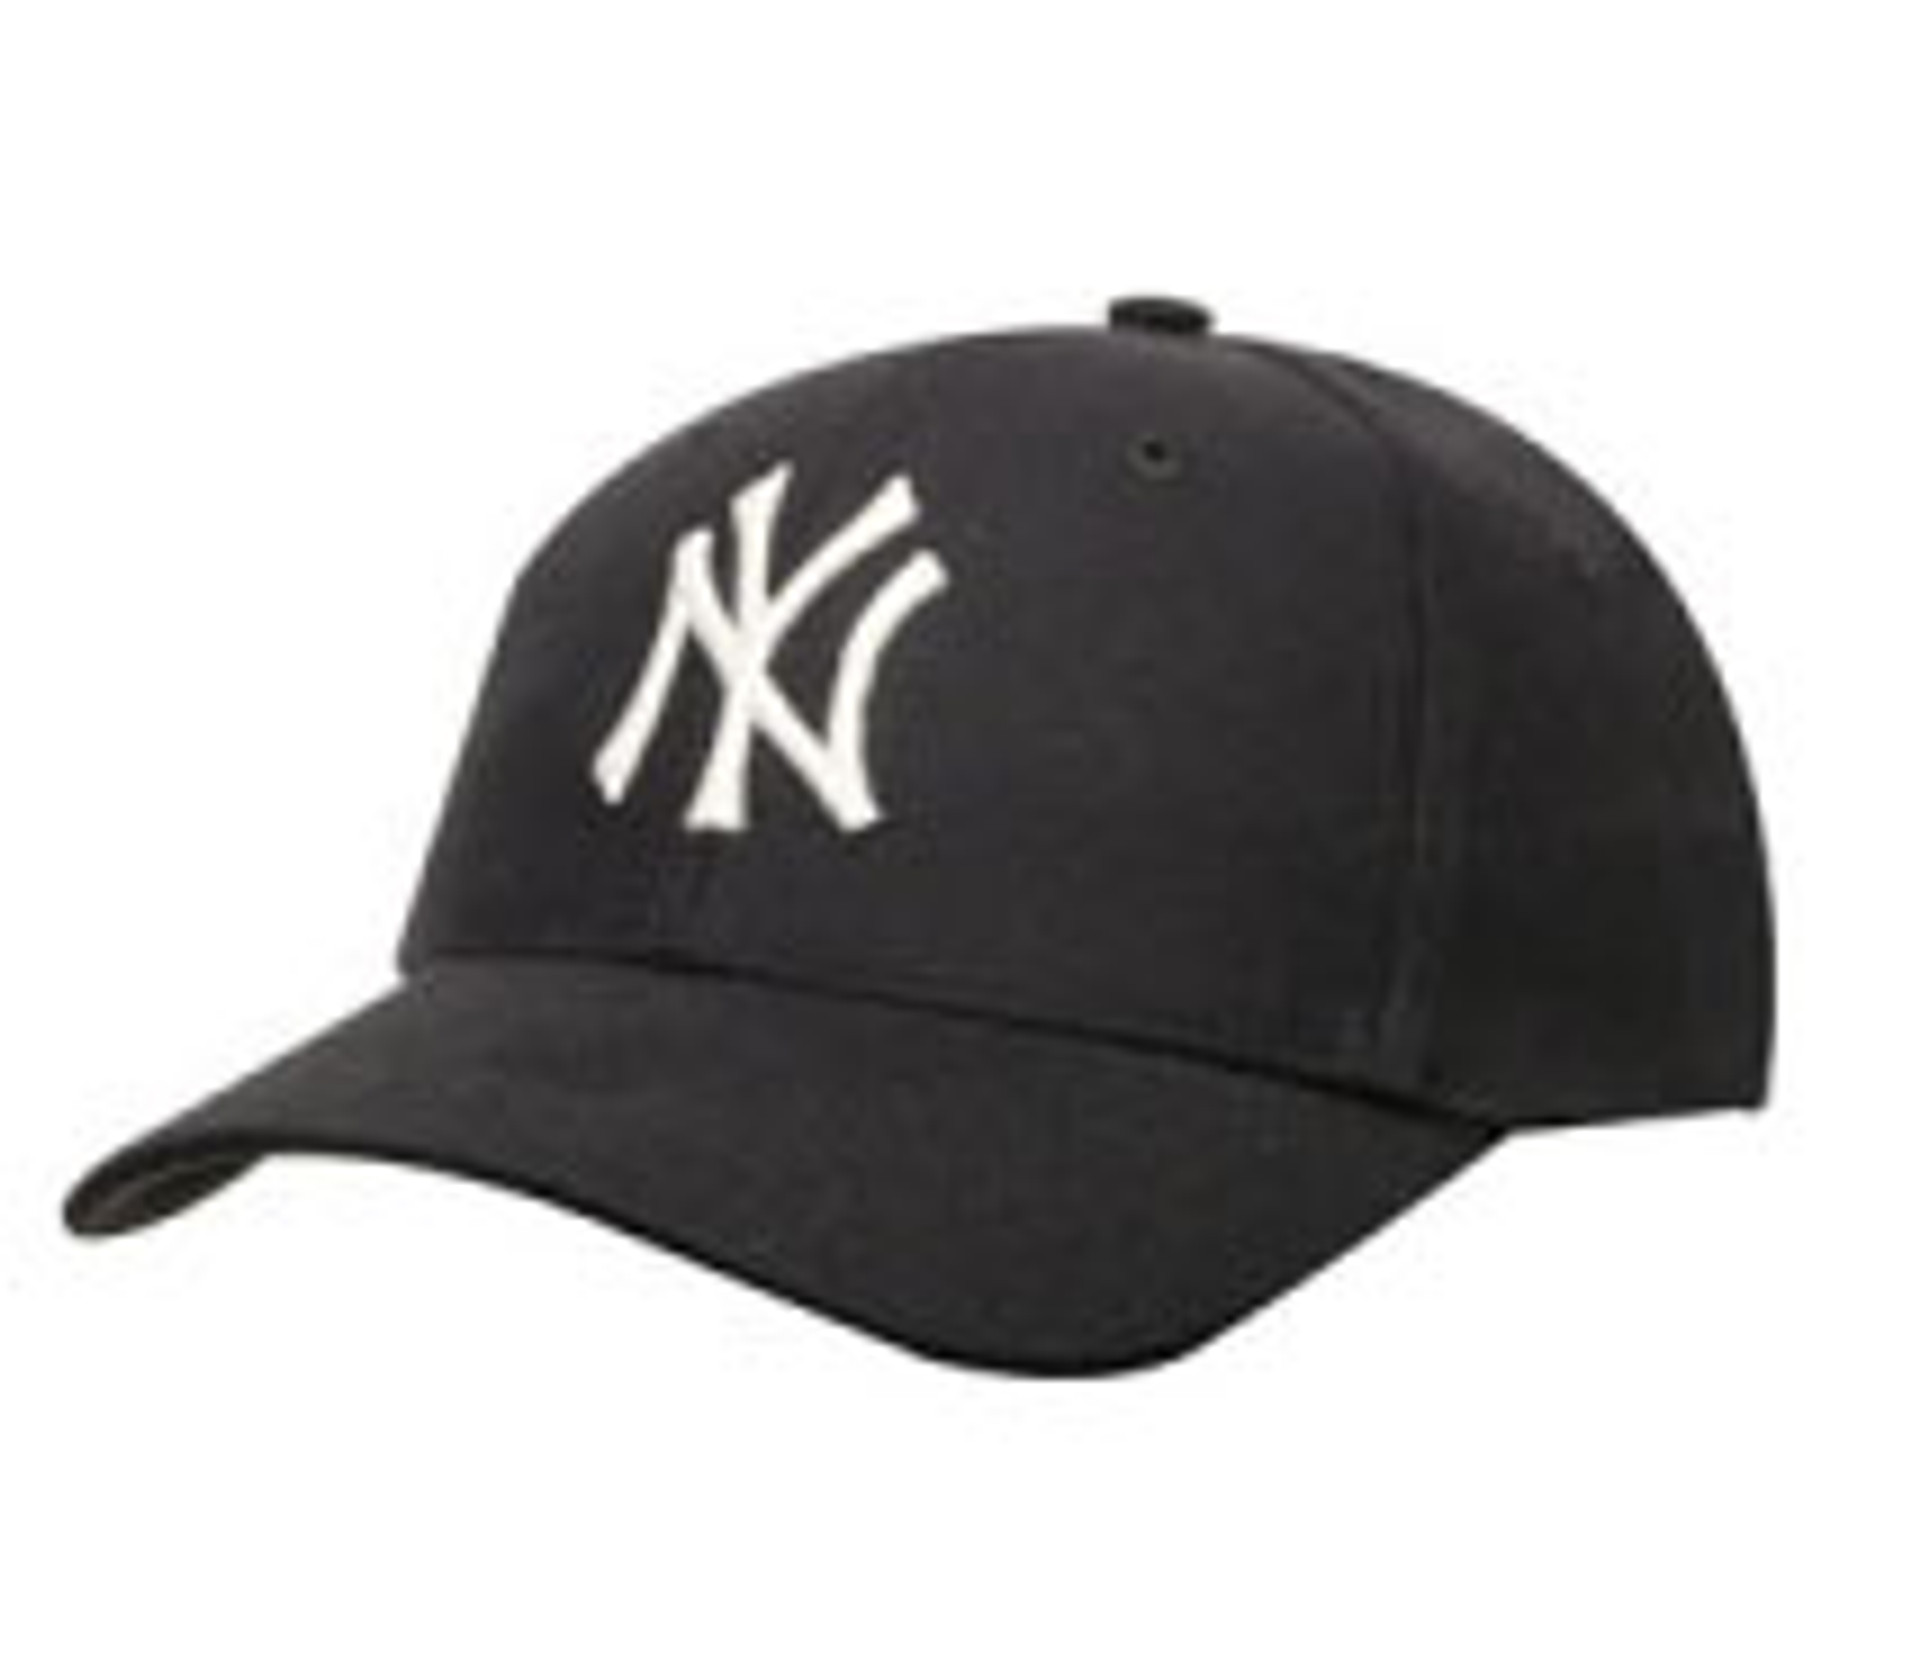 NYPD Patch Navy Adjustable Cap